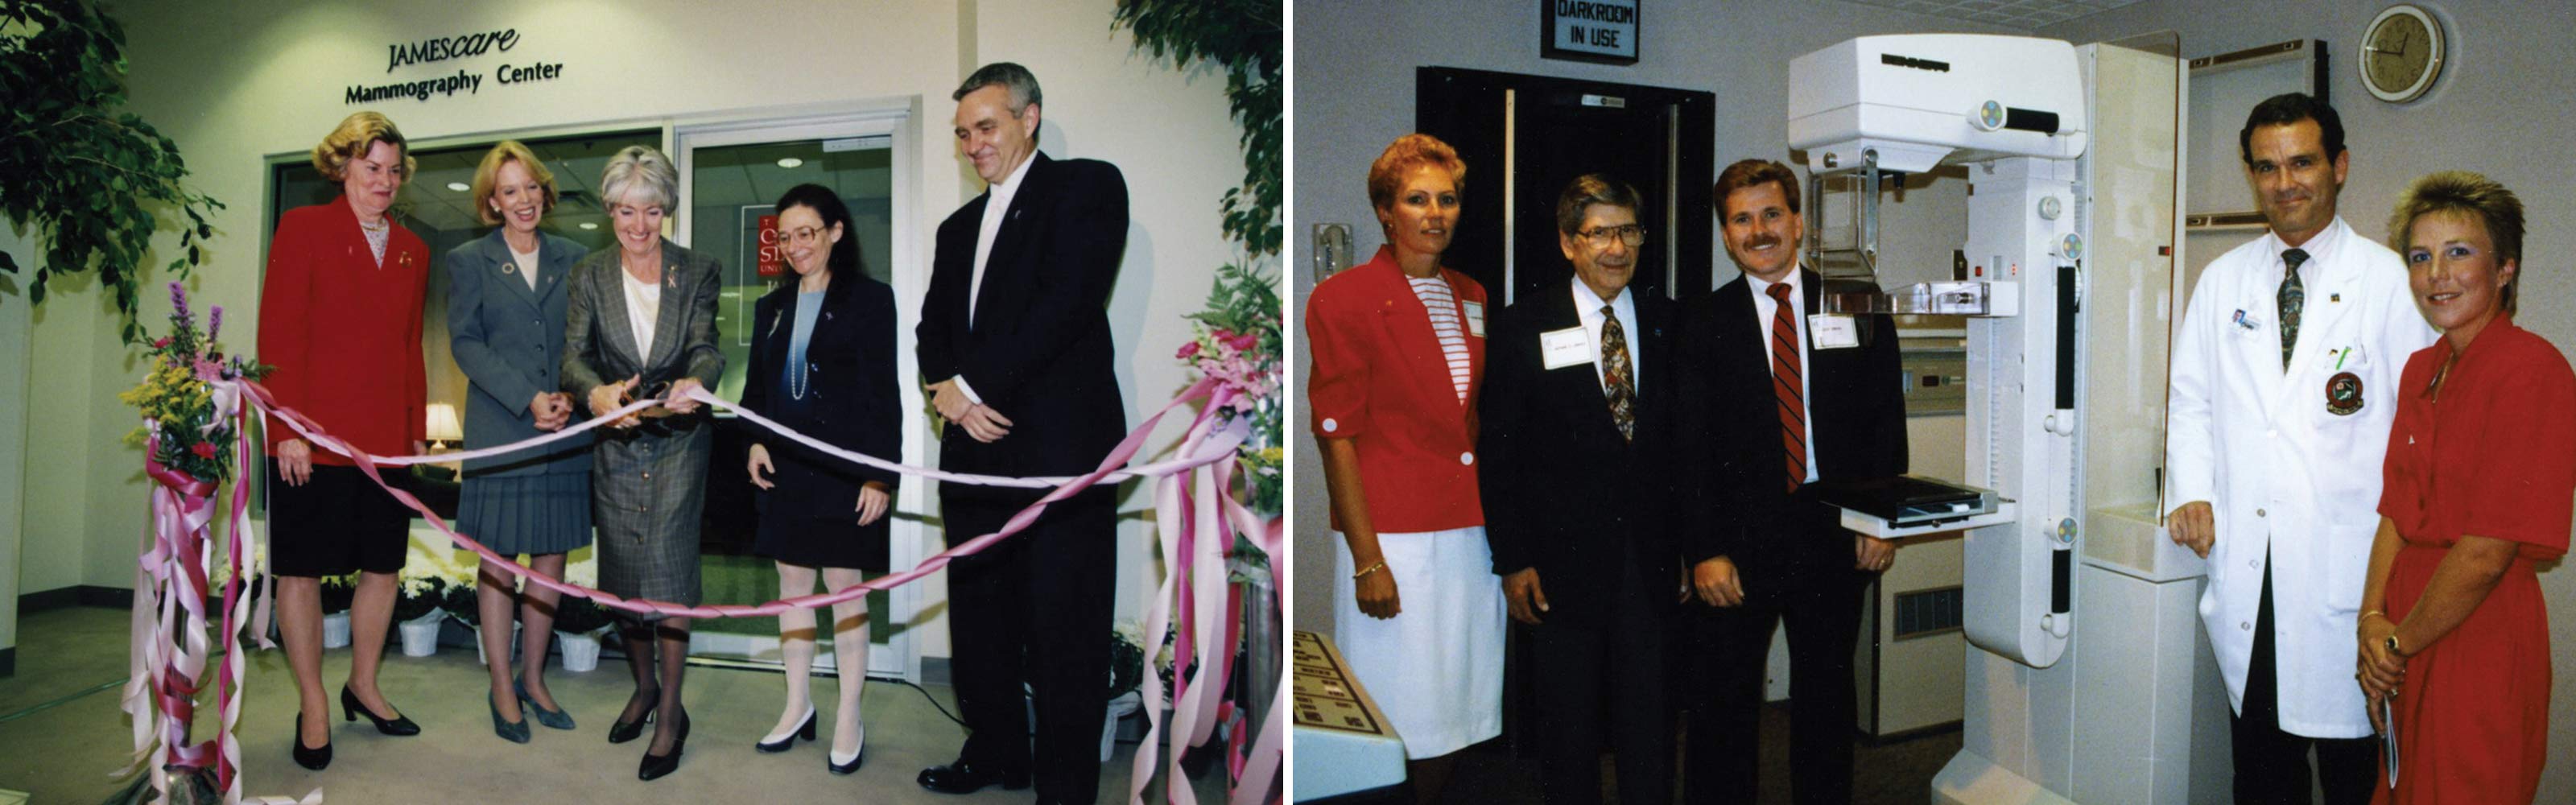 Historic photos from the ribbon cutting ceremonies